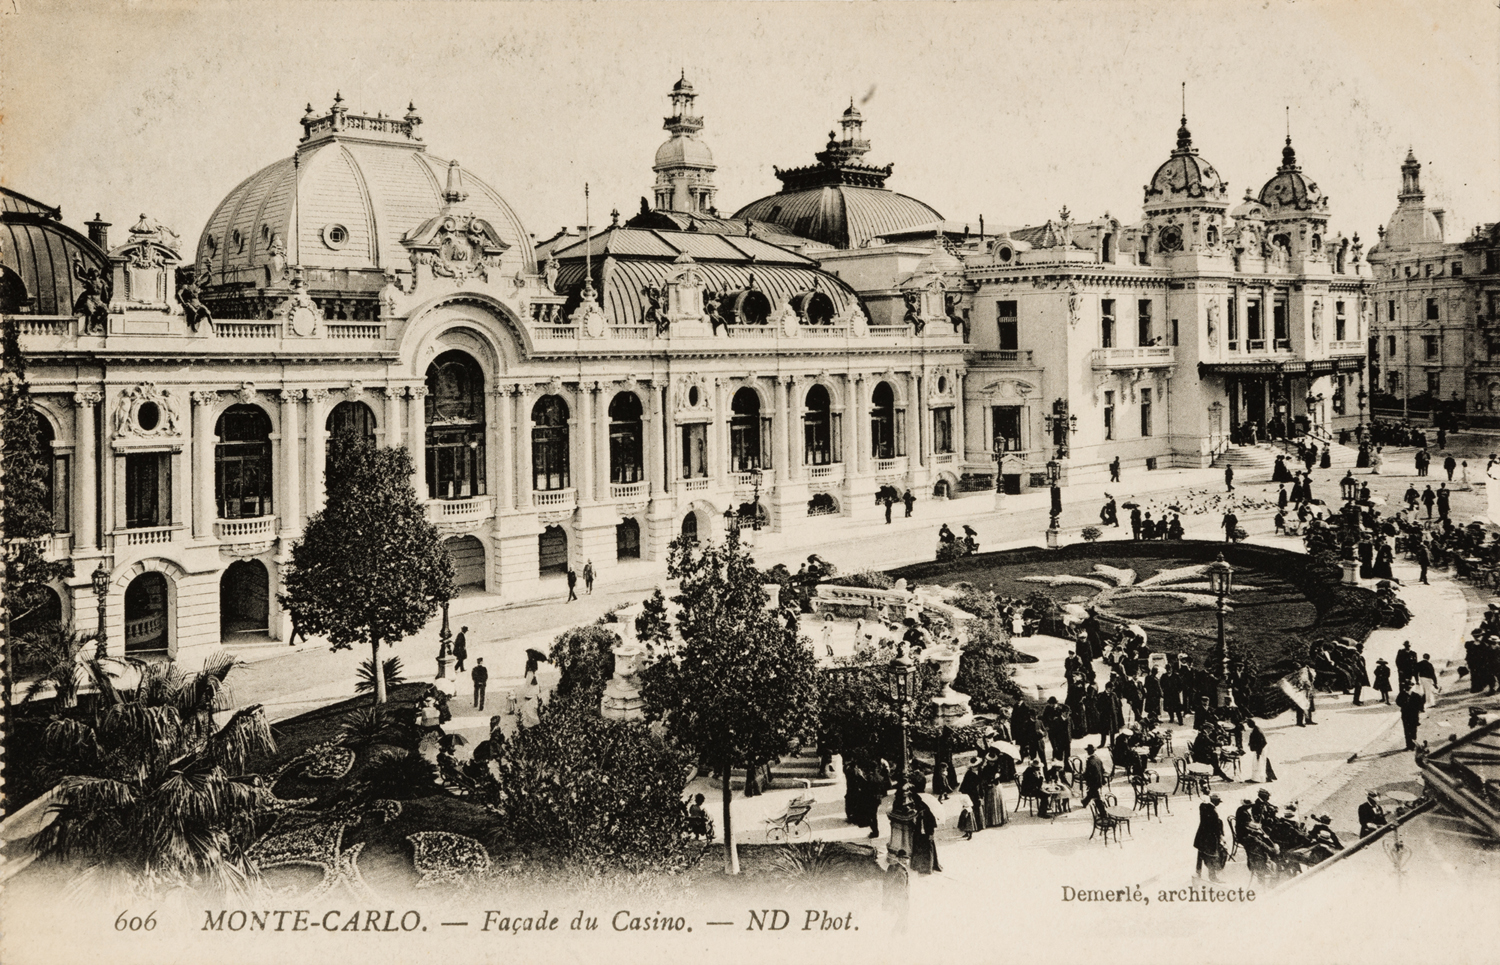 Vintage Pointe » “Home and Rest”: A Ballet Lover’s Guide to Monte Carlo